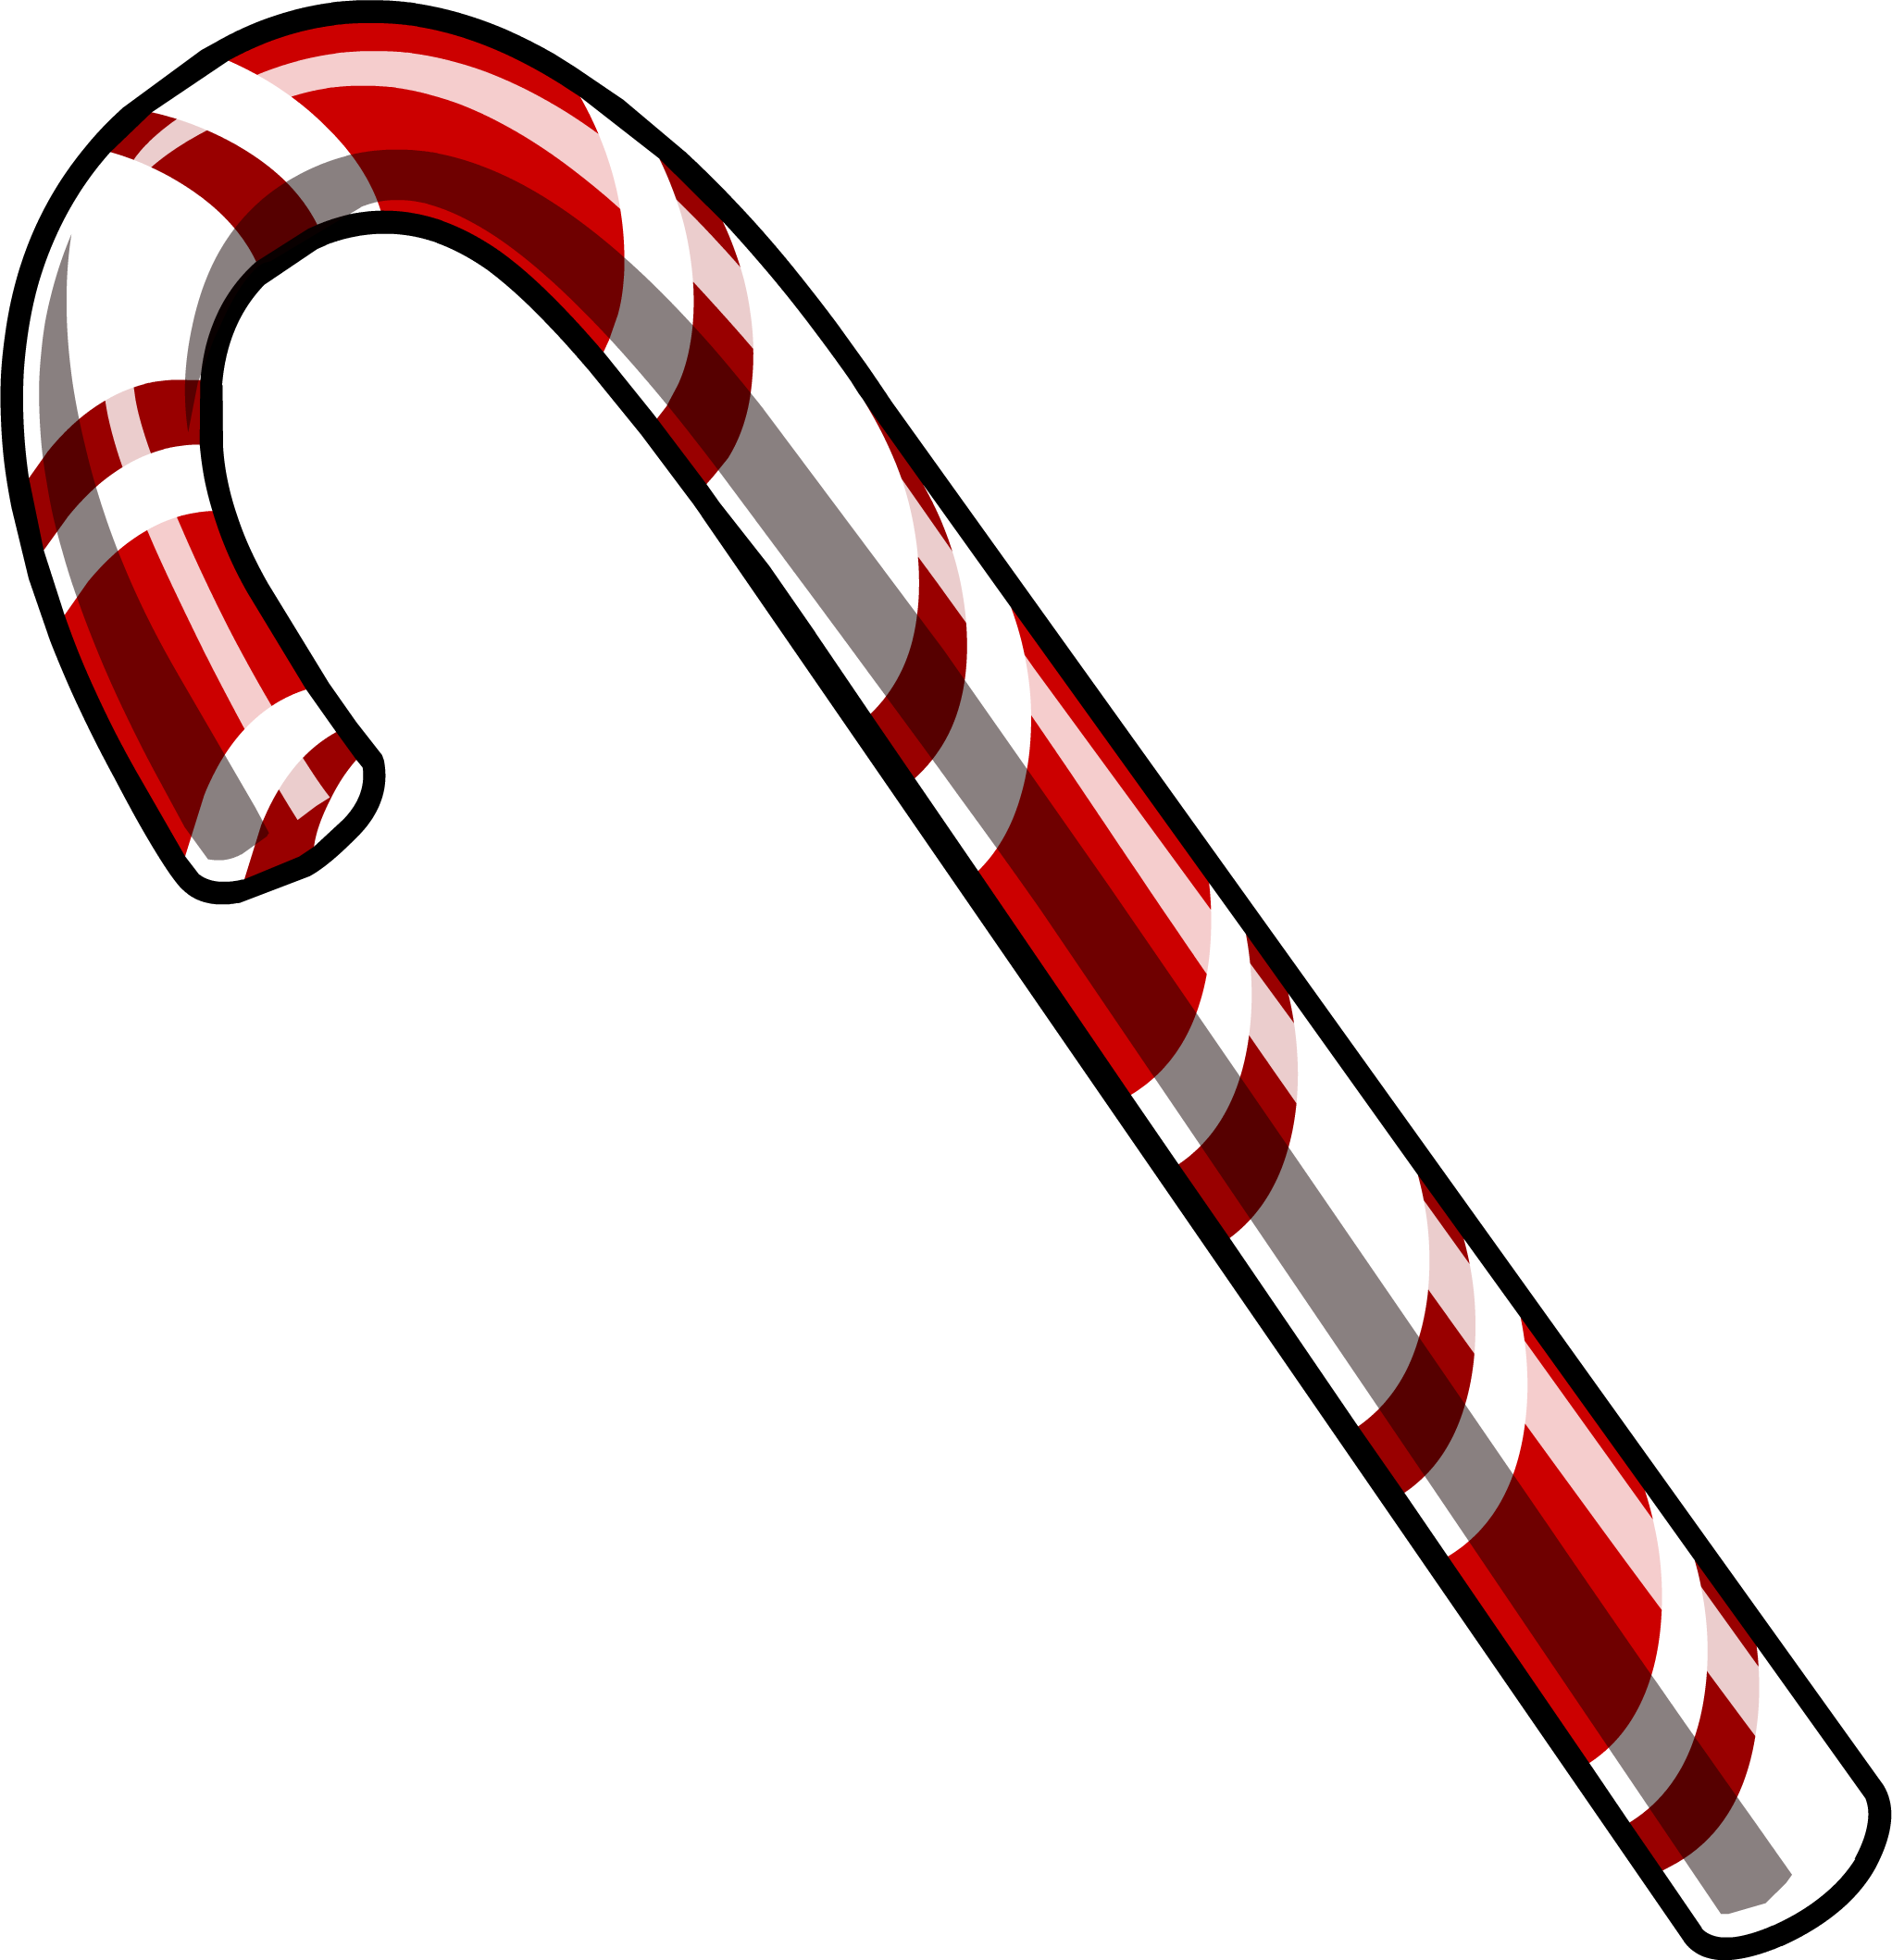 Candy Cane File PNG Image